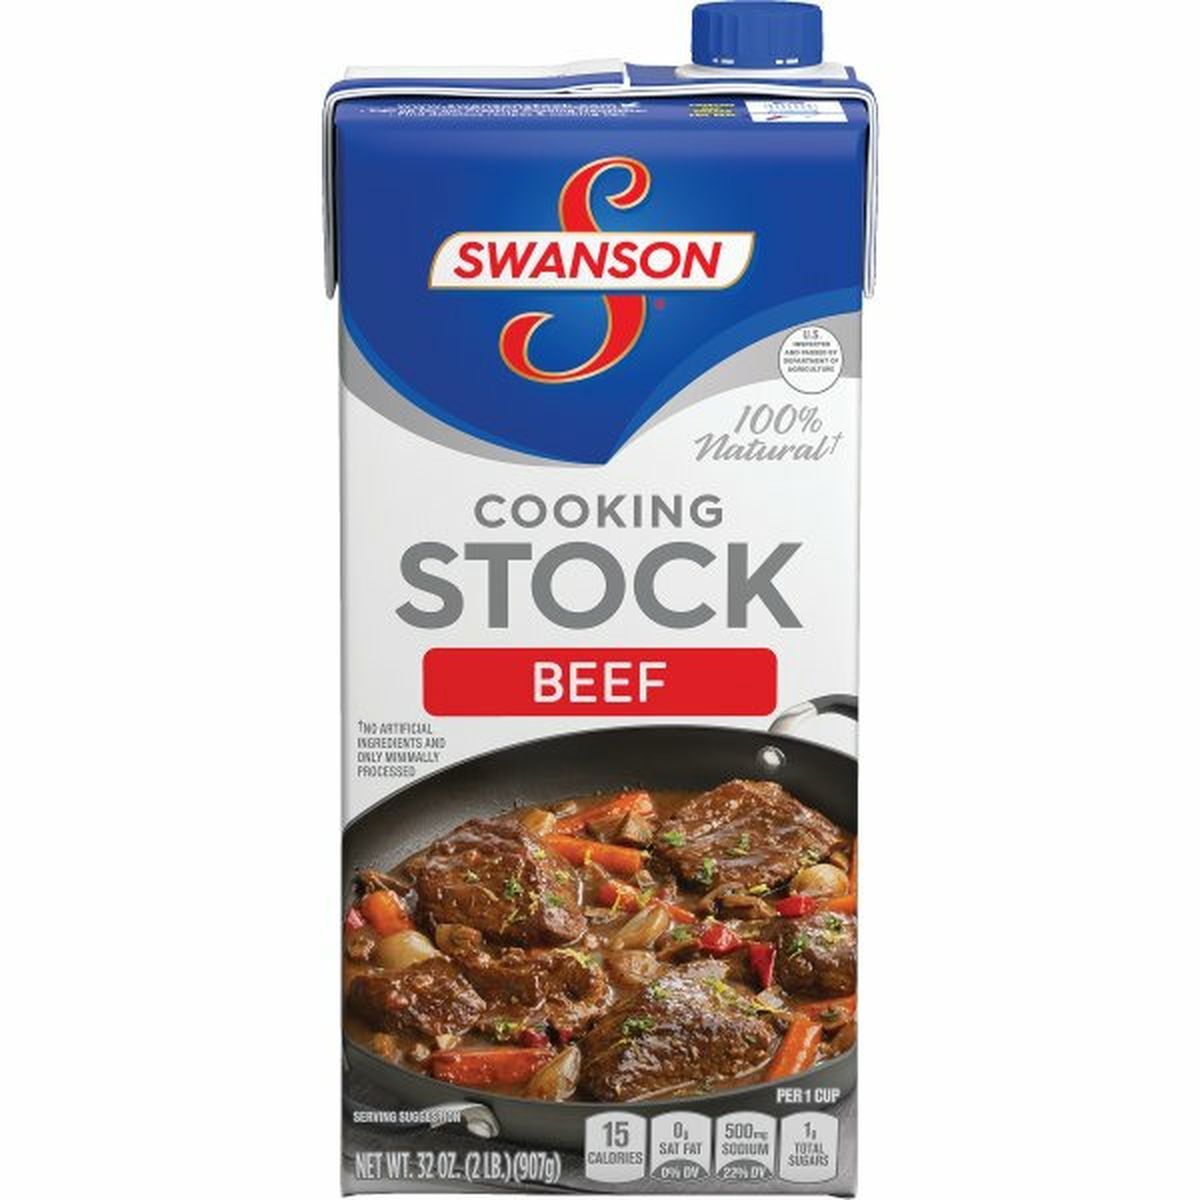 Calories in Swansons Beef Stock